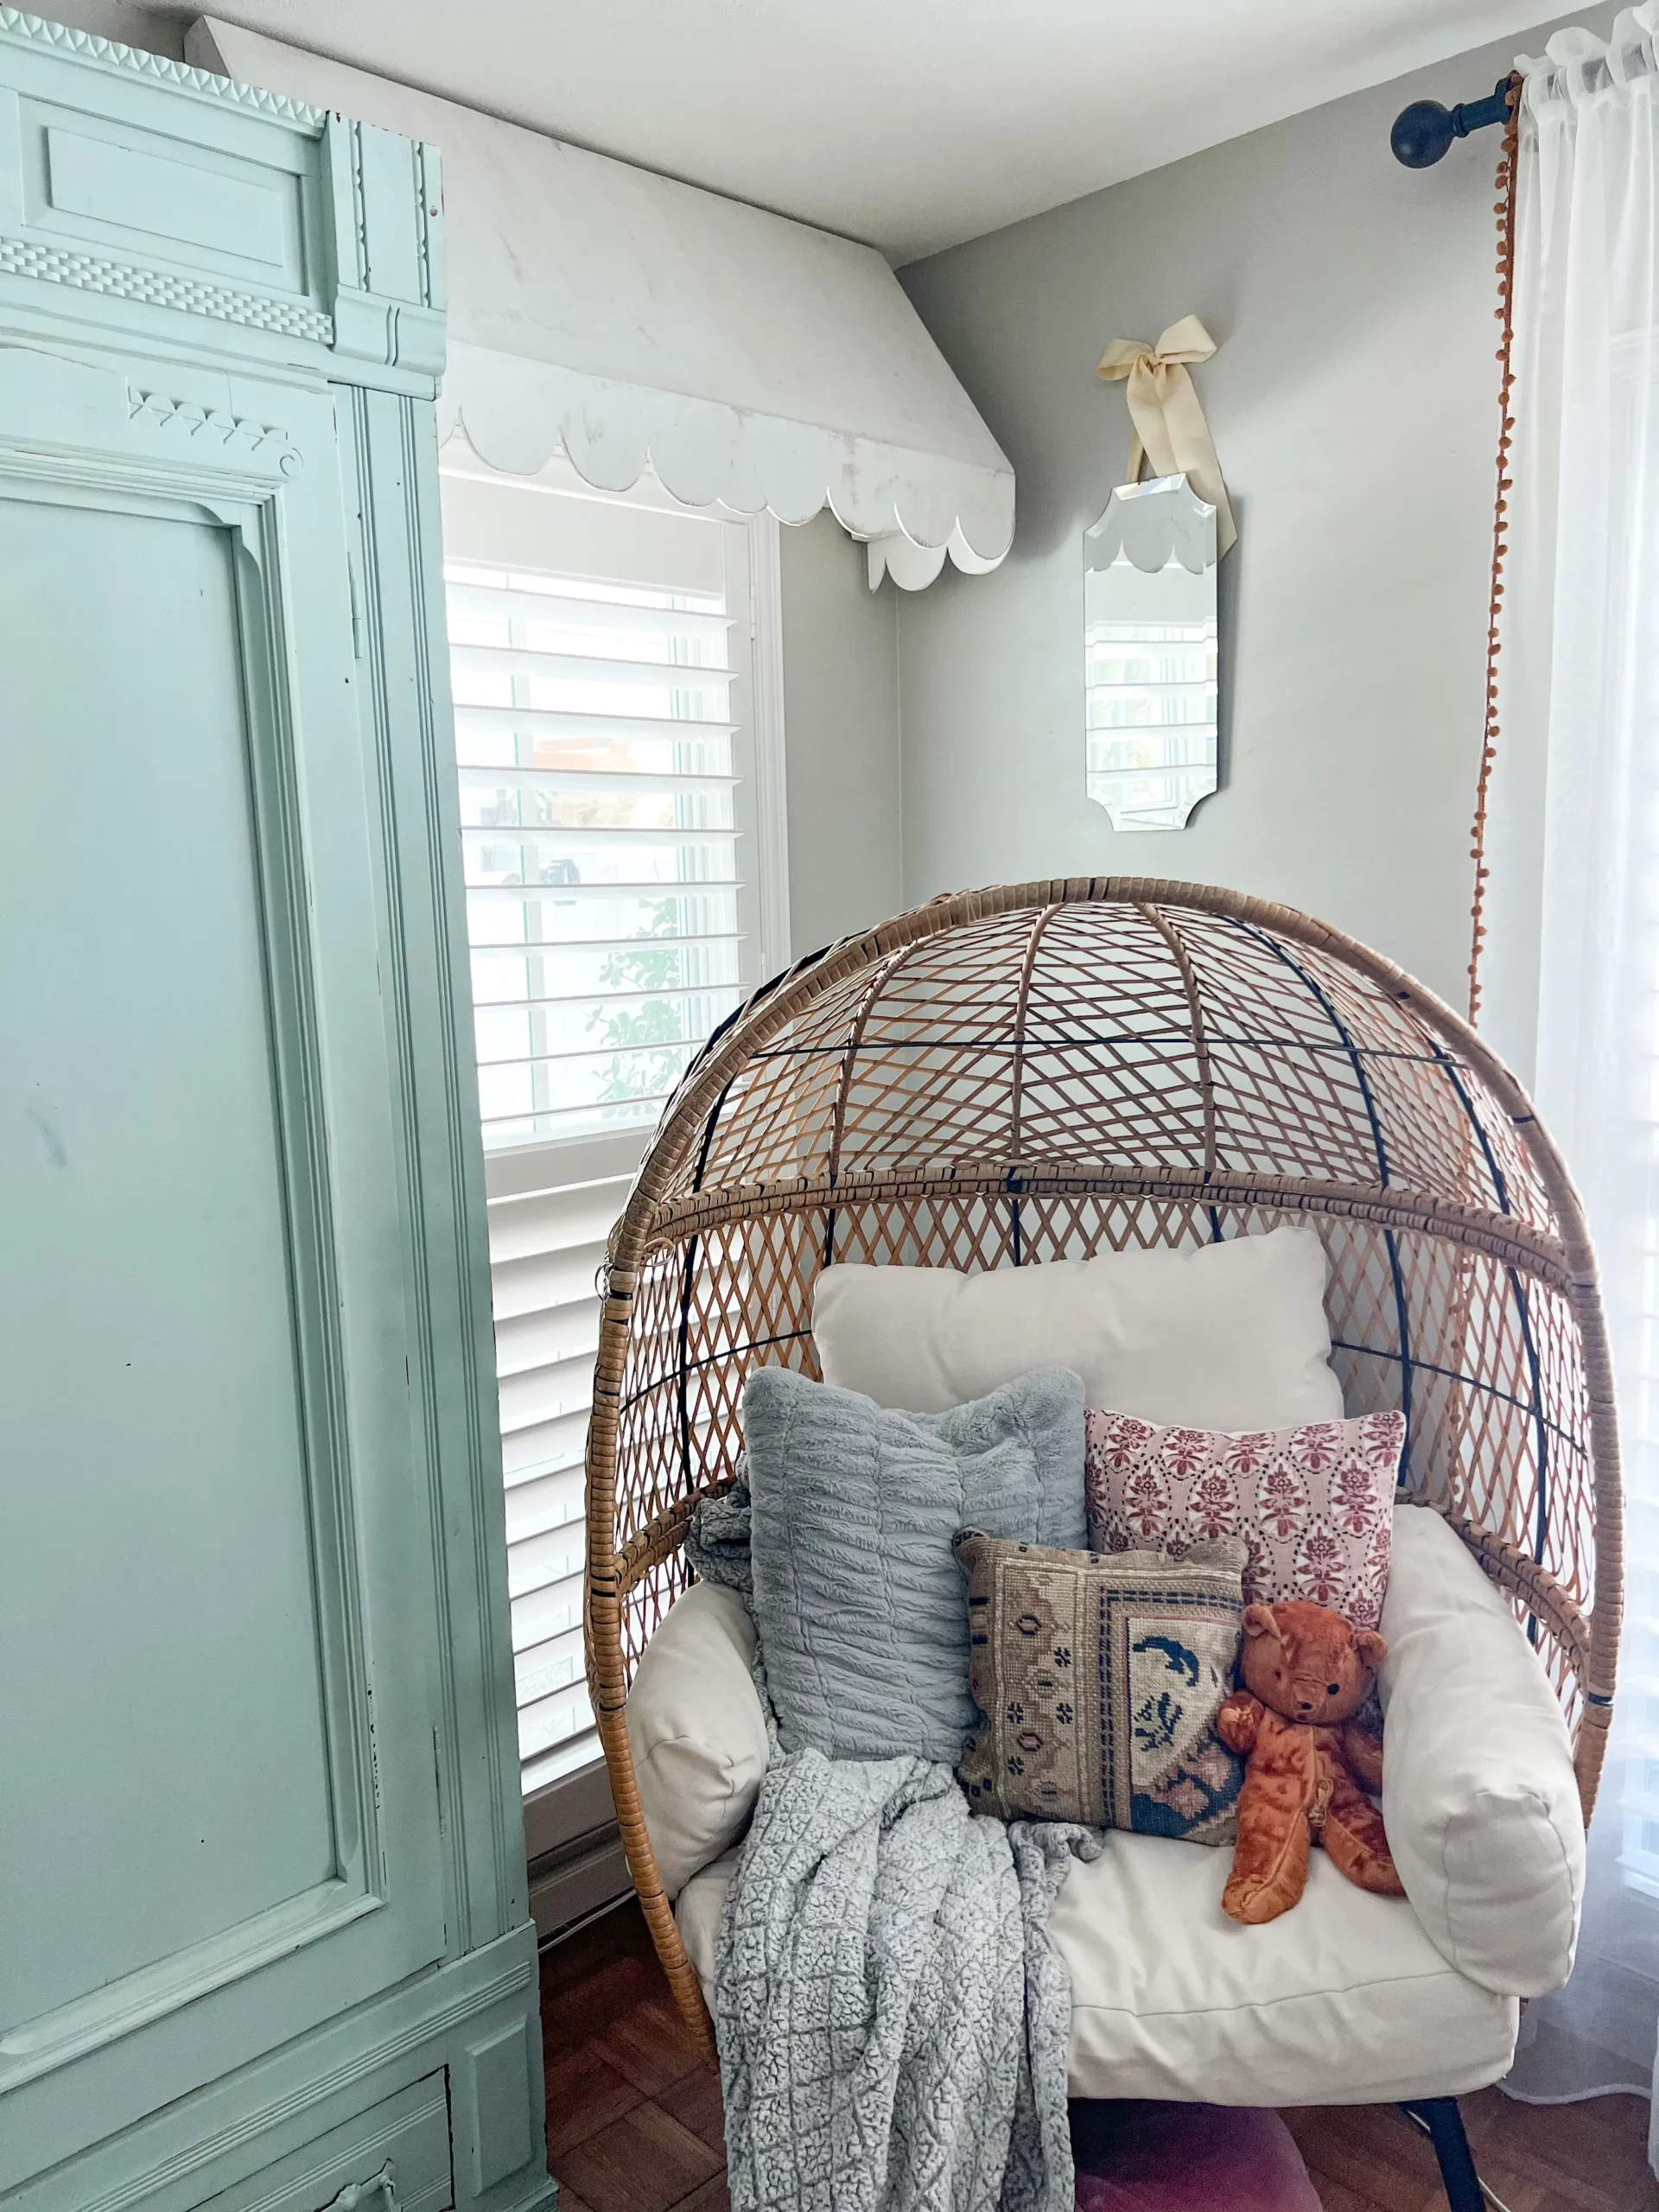 white wooden scalloped awning over a window with plantation shutters in the girls' room